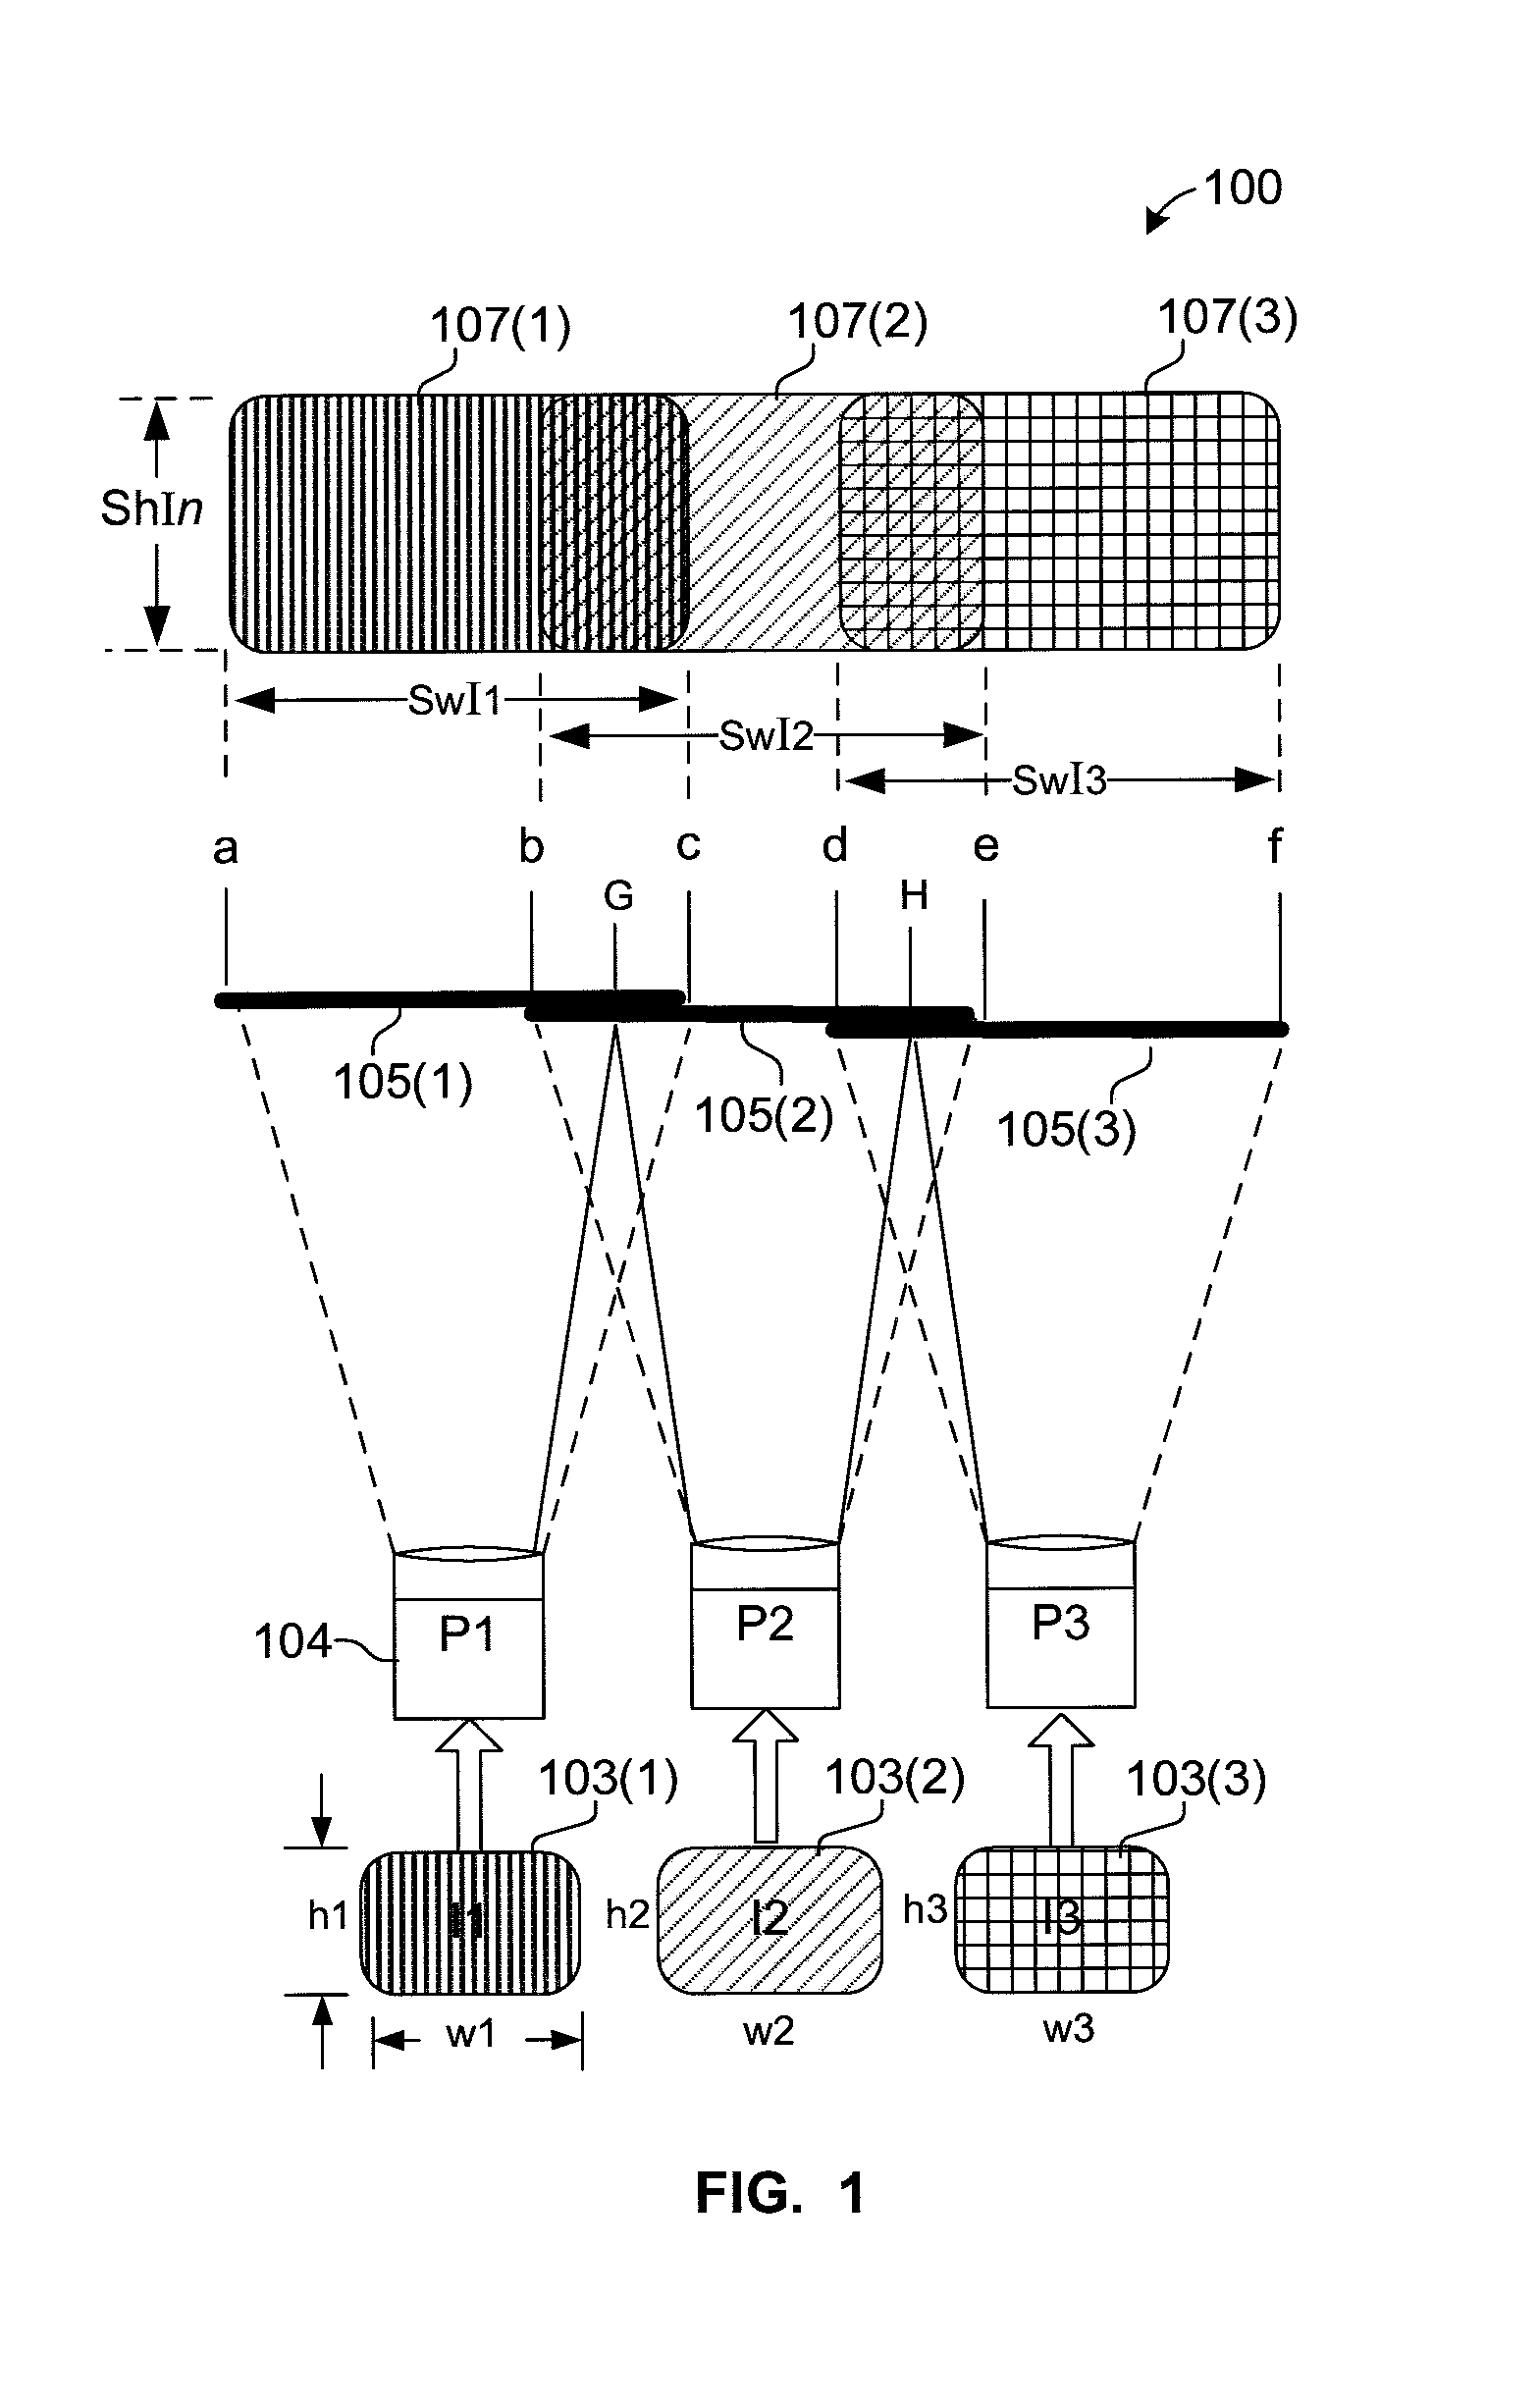 System And Method For Image Aspect Preservation In Multiple Projector Alignment